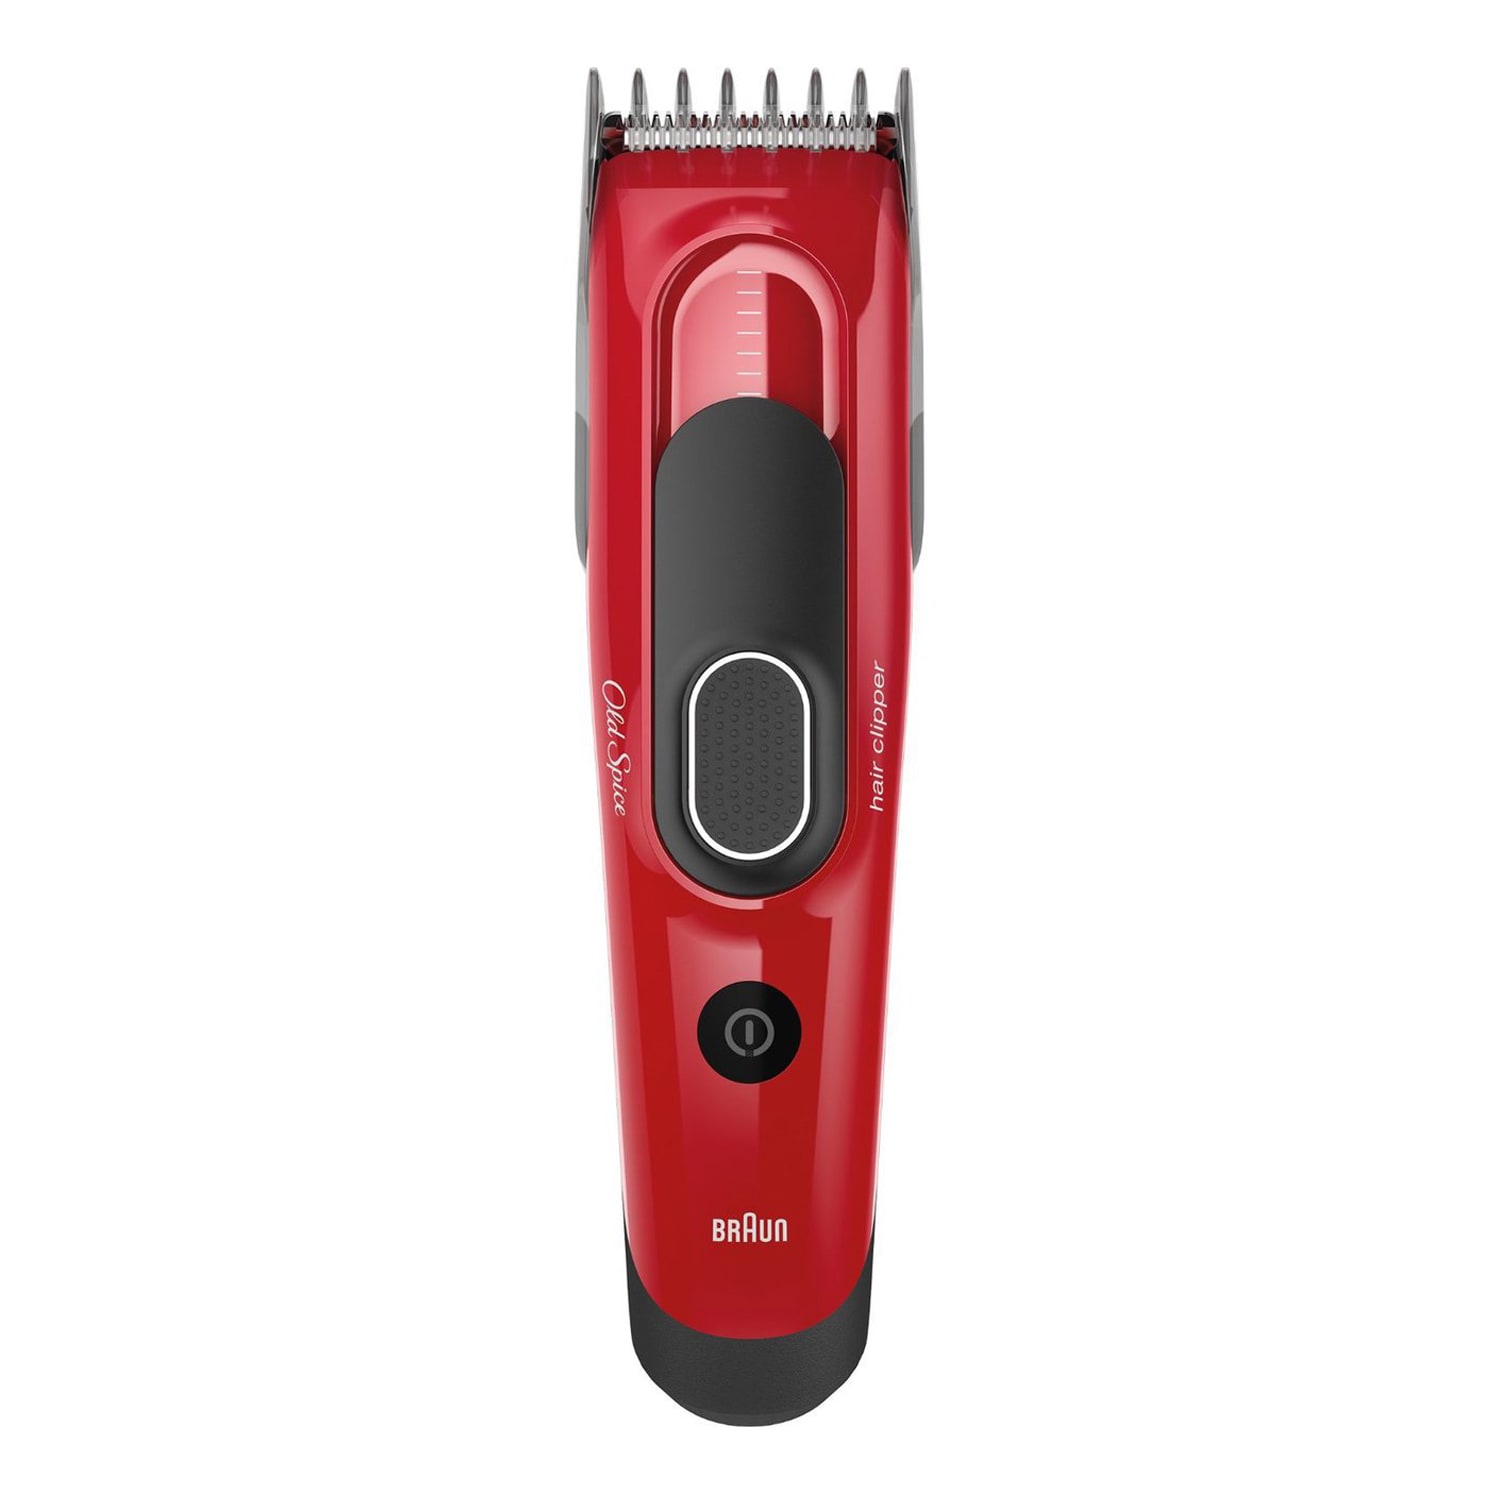 old spice trimmer